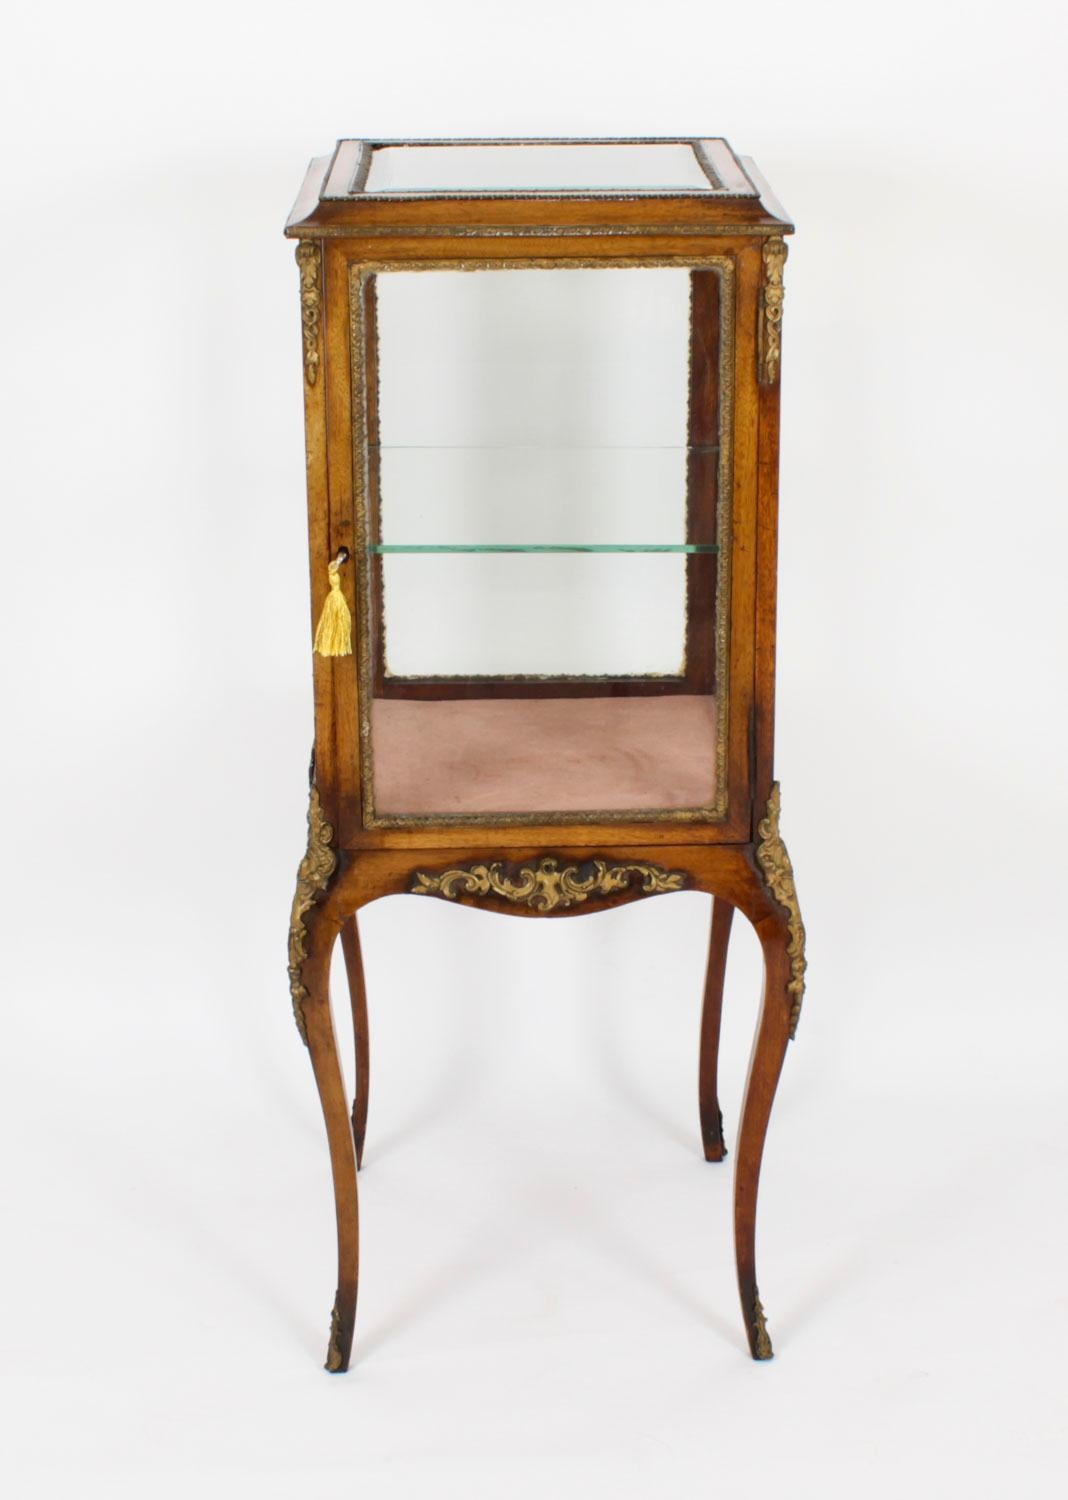 This is an exquisite antique French bois violette  vitrine of square shaped form with glazed sides and fabulous ormolu mounts, circa 1880 in date.

This cabinet is elegantly crafted from fabulous bois violette, otherwise known as violetwood with